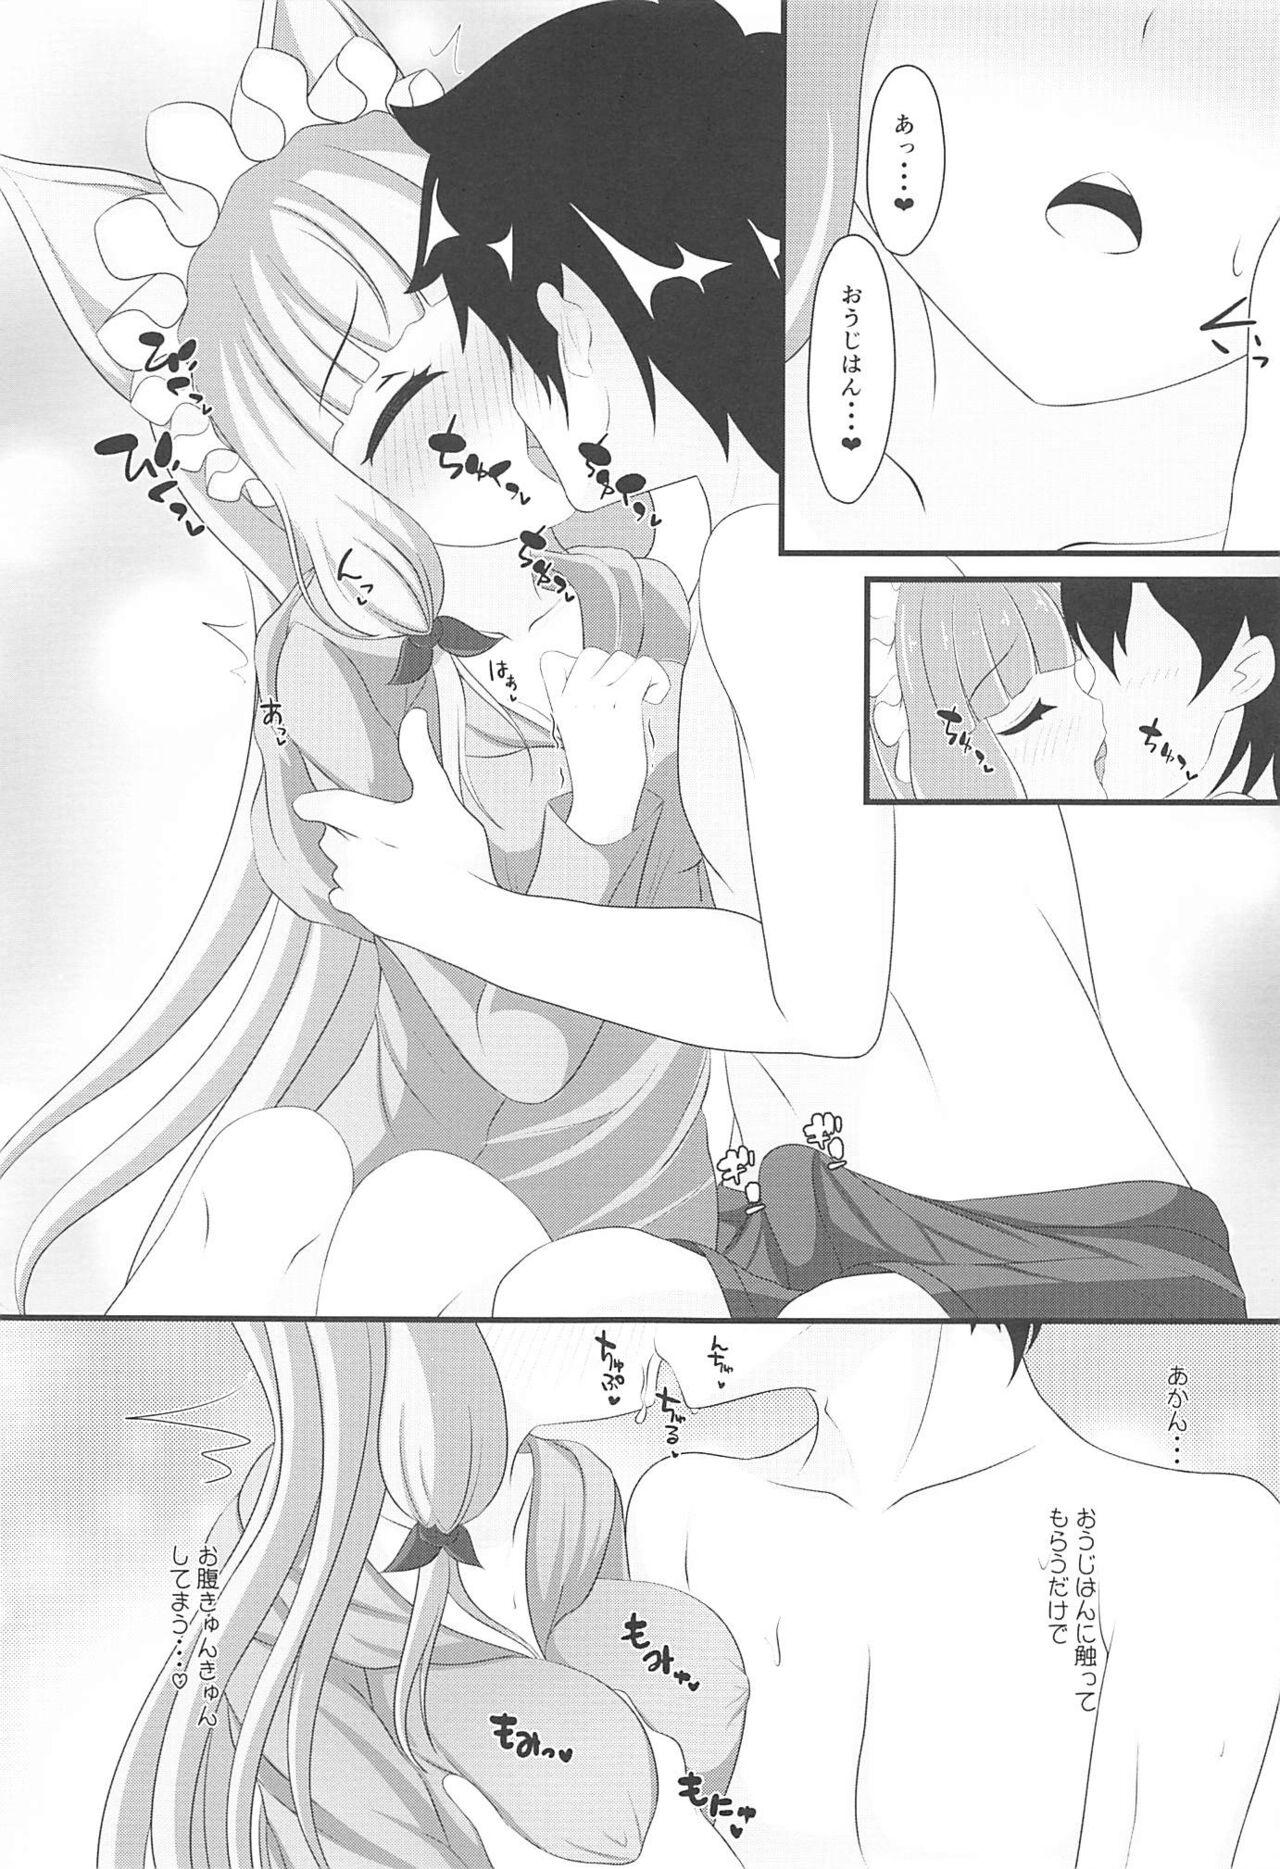 Teenage Maho Hime Connect! 2 - Princess connect Blowjob Contest - Page 6